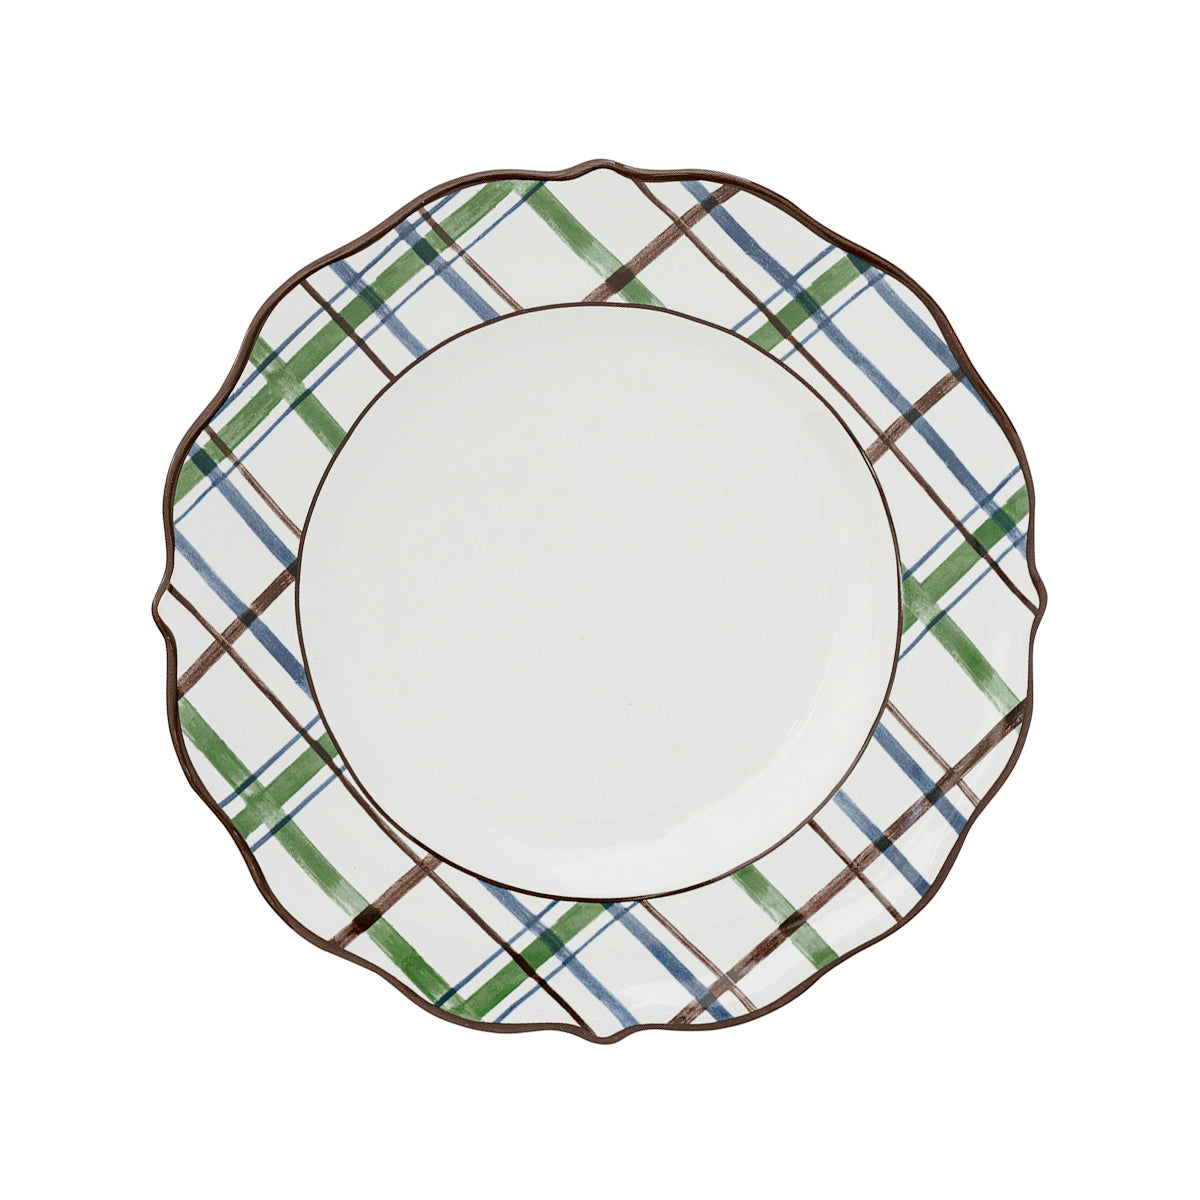 Juliska and Veronica Beard bring you a collaboration of dinnerware inspired by the colors and patterns of the Iberian coast. This dessert/salad plate features a sweetly scalloped silhouette and is banded with a Tartan plaid motif in handsome hues of brown, blue and green.